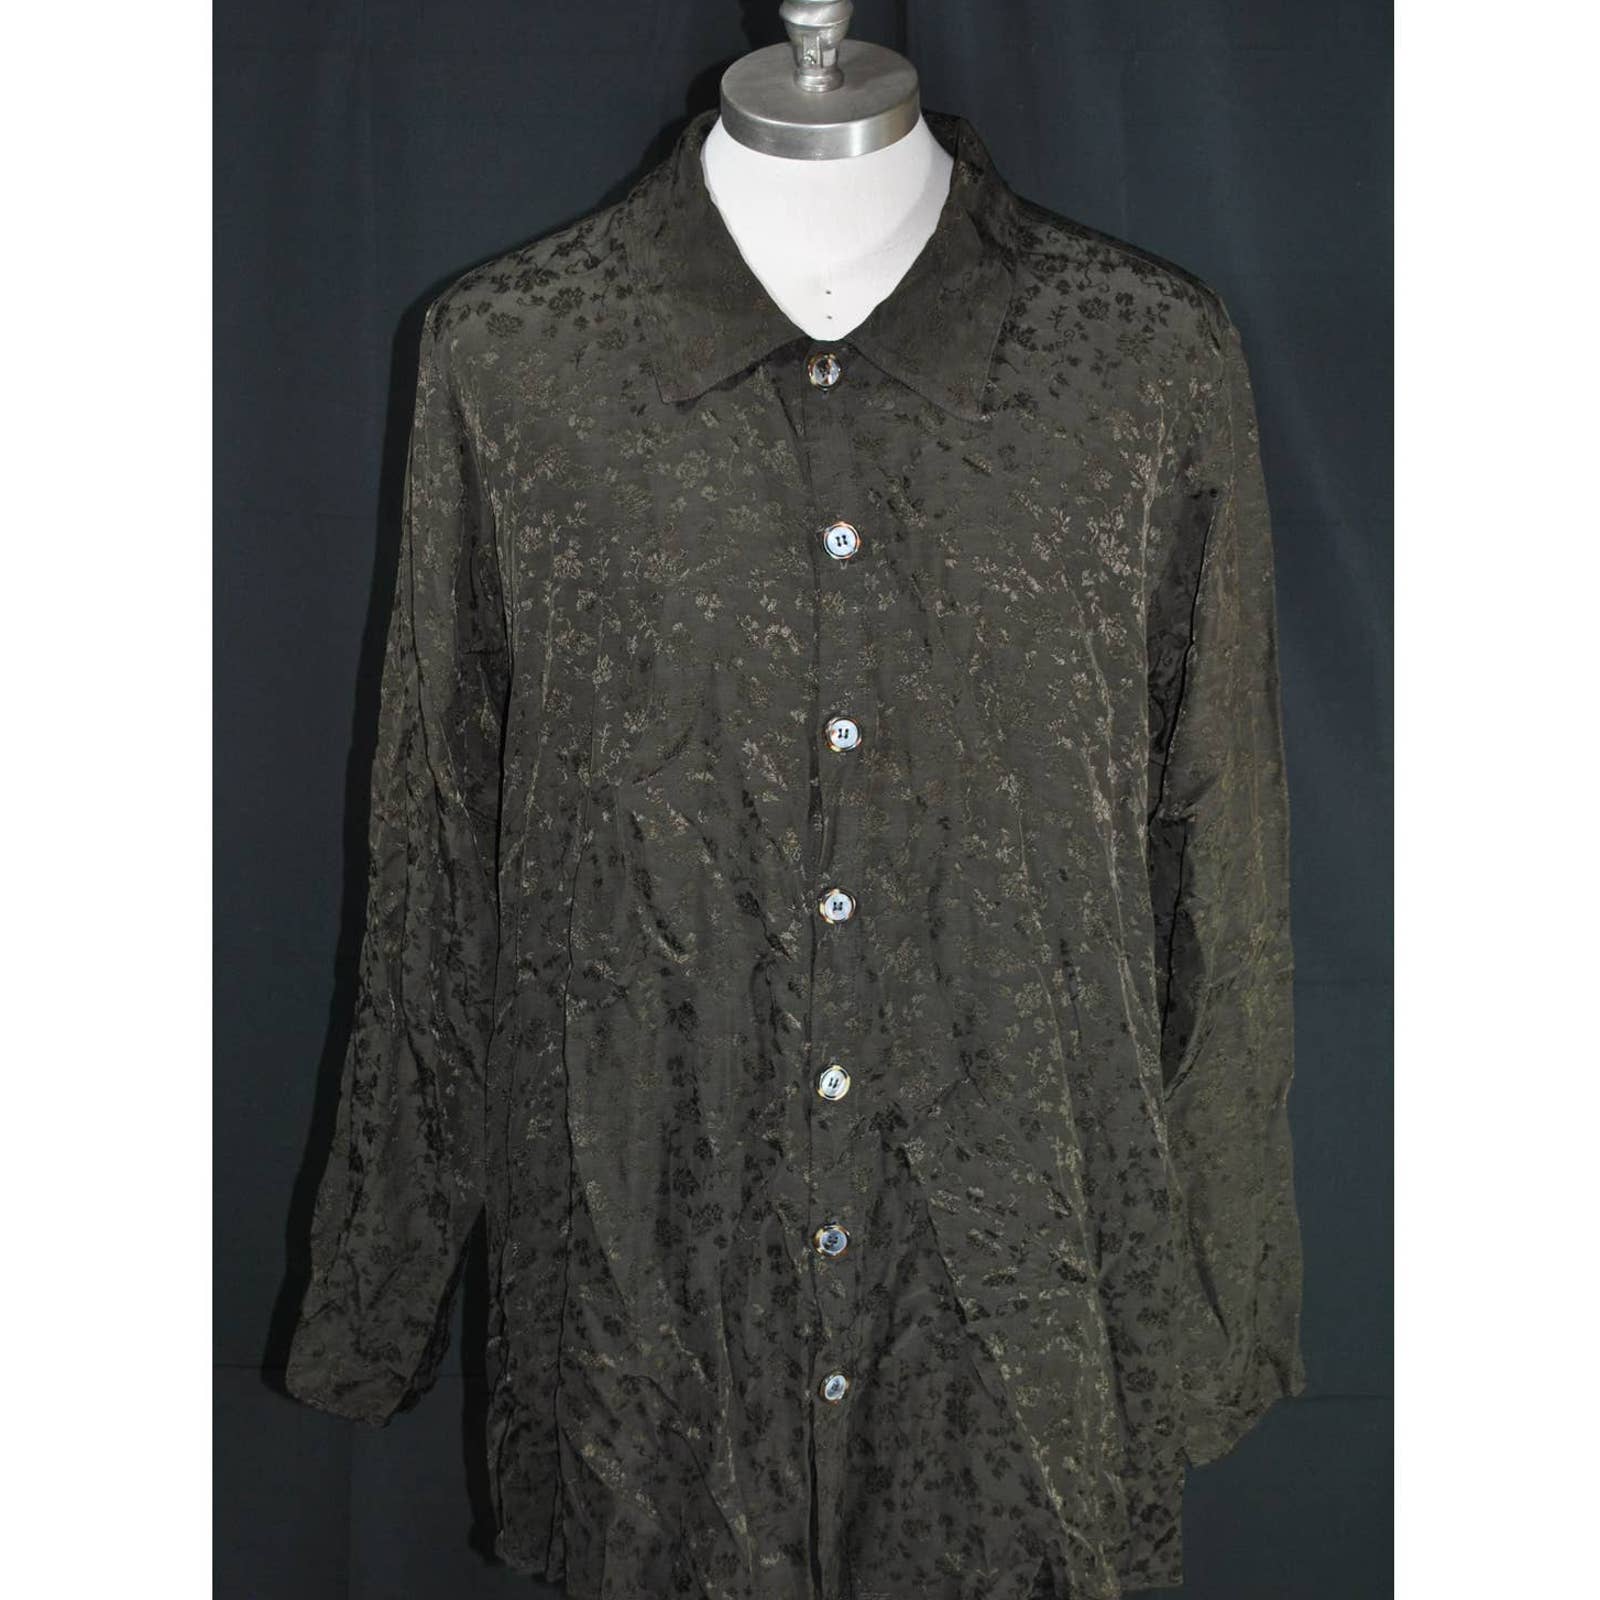 CP Shades  Black Tunic Button Up Hand Dyed Floral Top - L